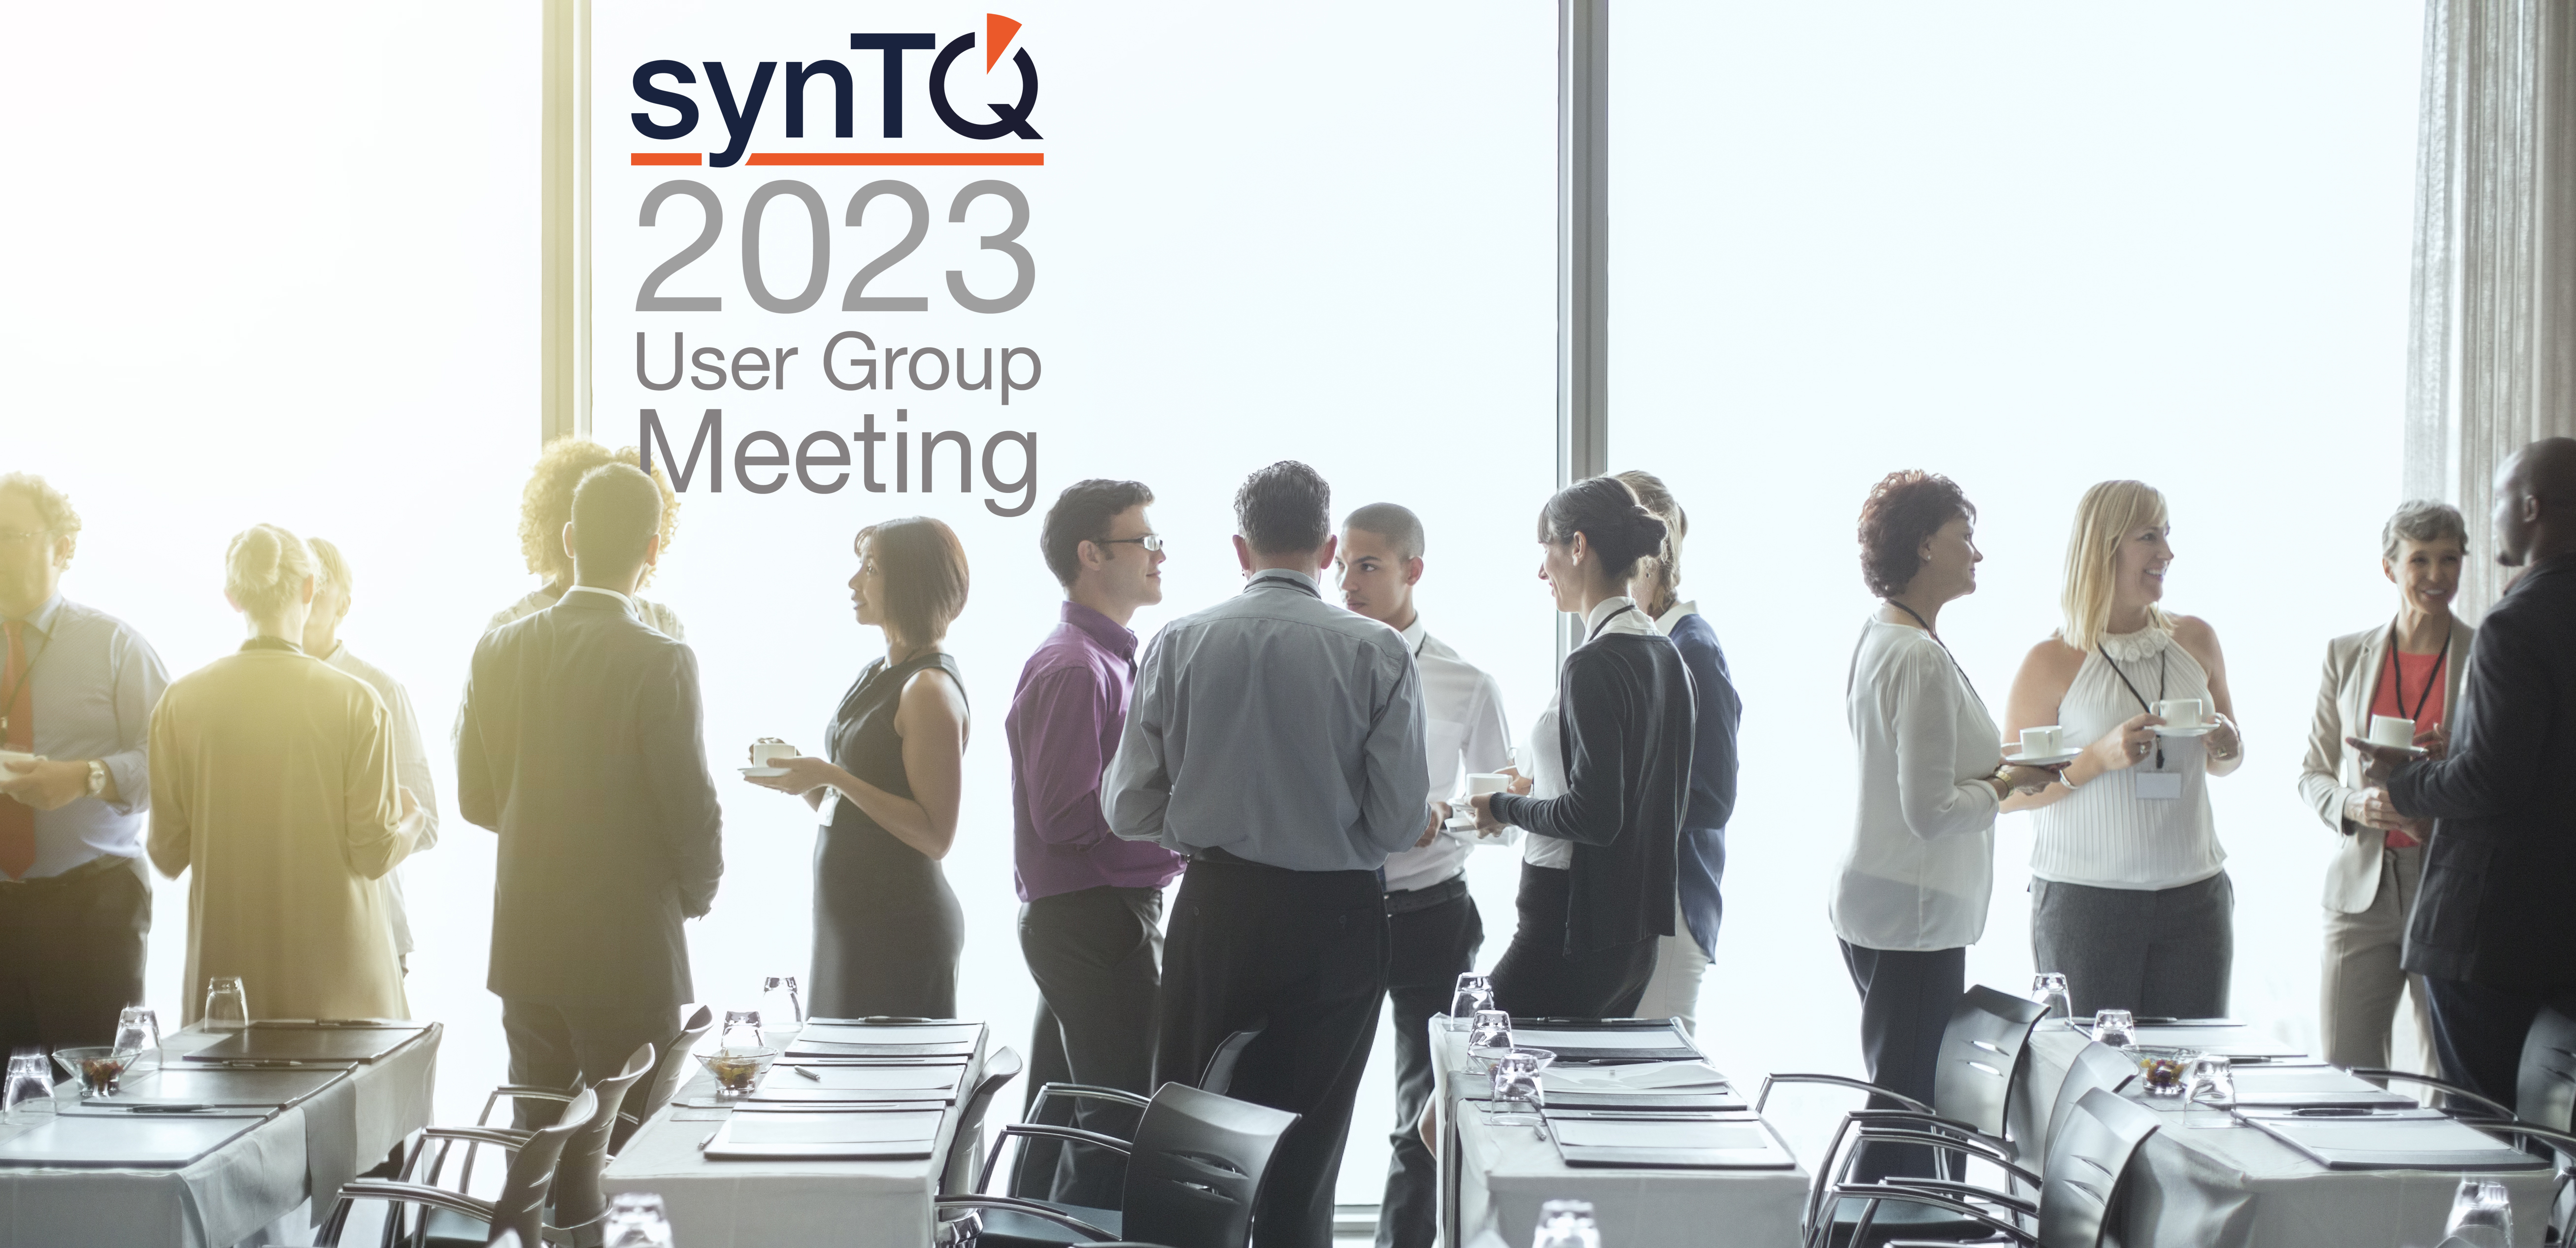 The synTQ User Group Meeting and synTQ training will take place from 18th-20th September 2023 at Normandy Farm, Blue Bell, Philadelphia, PA 19422, U.S.A.